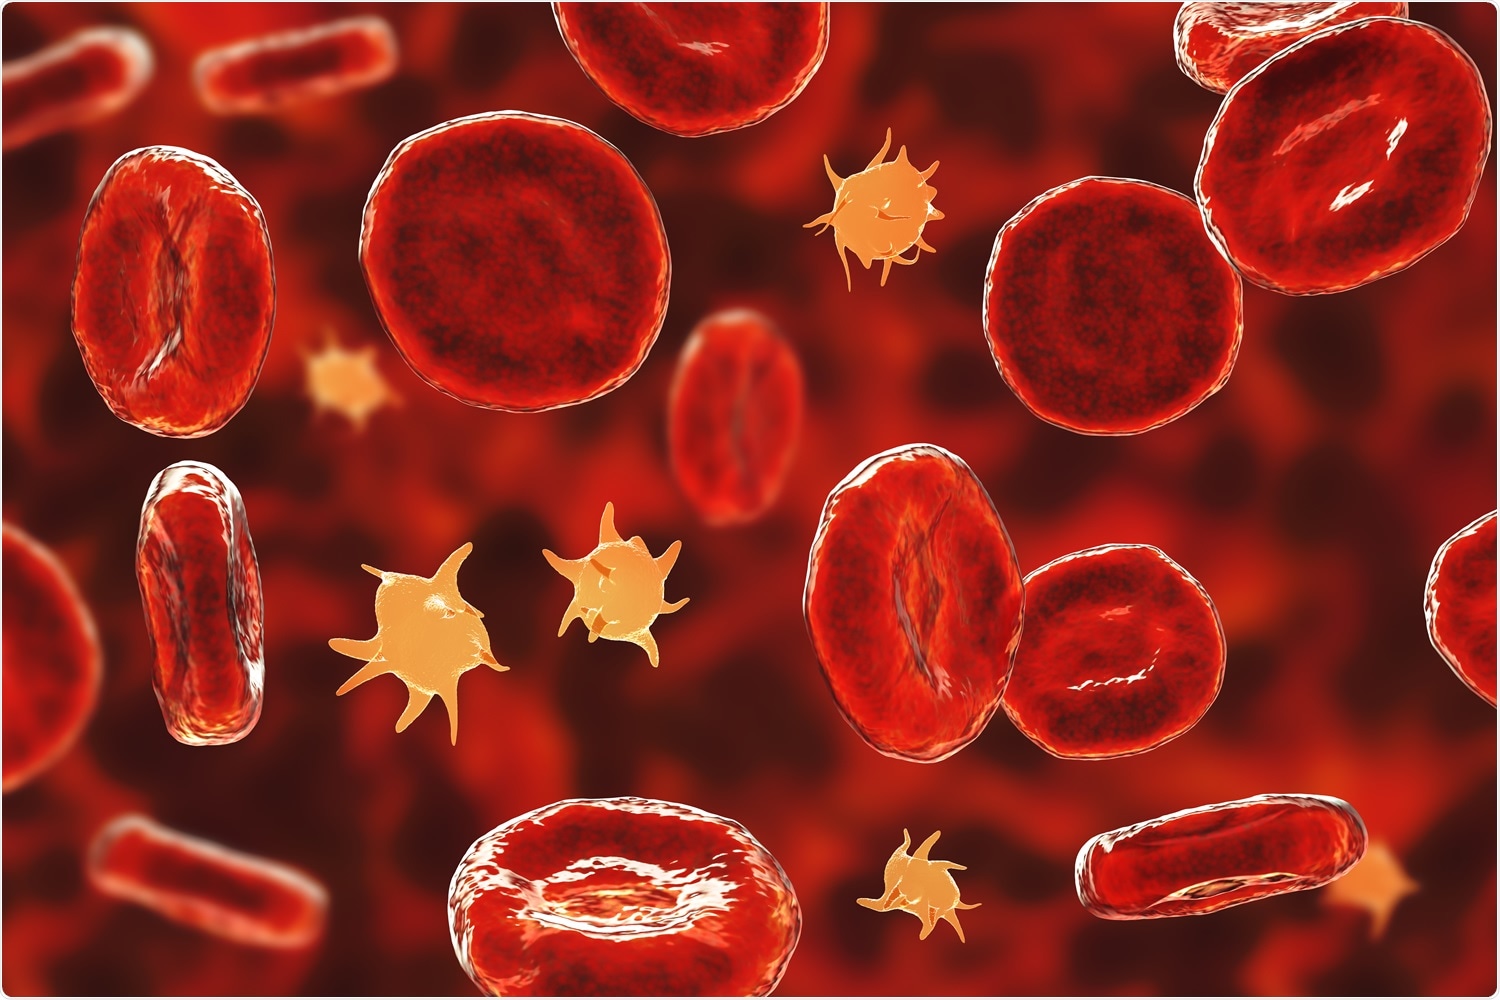 Study: Case Series of Thrombosis with Thrombocytopenia Syndrome following COVID-19 vaccination--United States, December 2020-August 2021. Image Credit: Kateryna Kon / Shutterstock